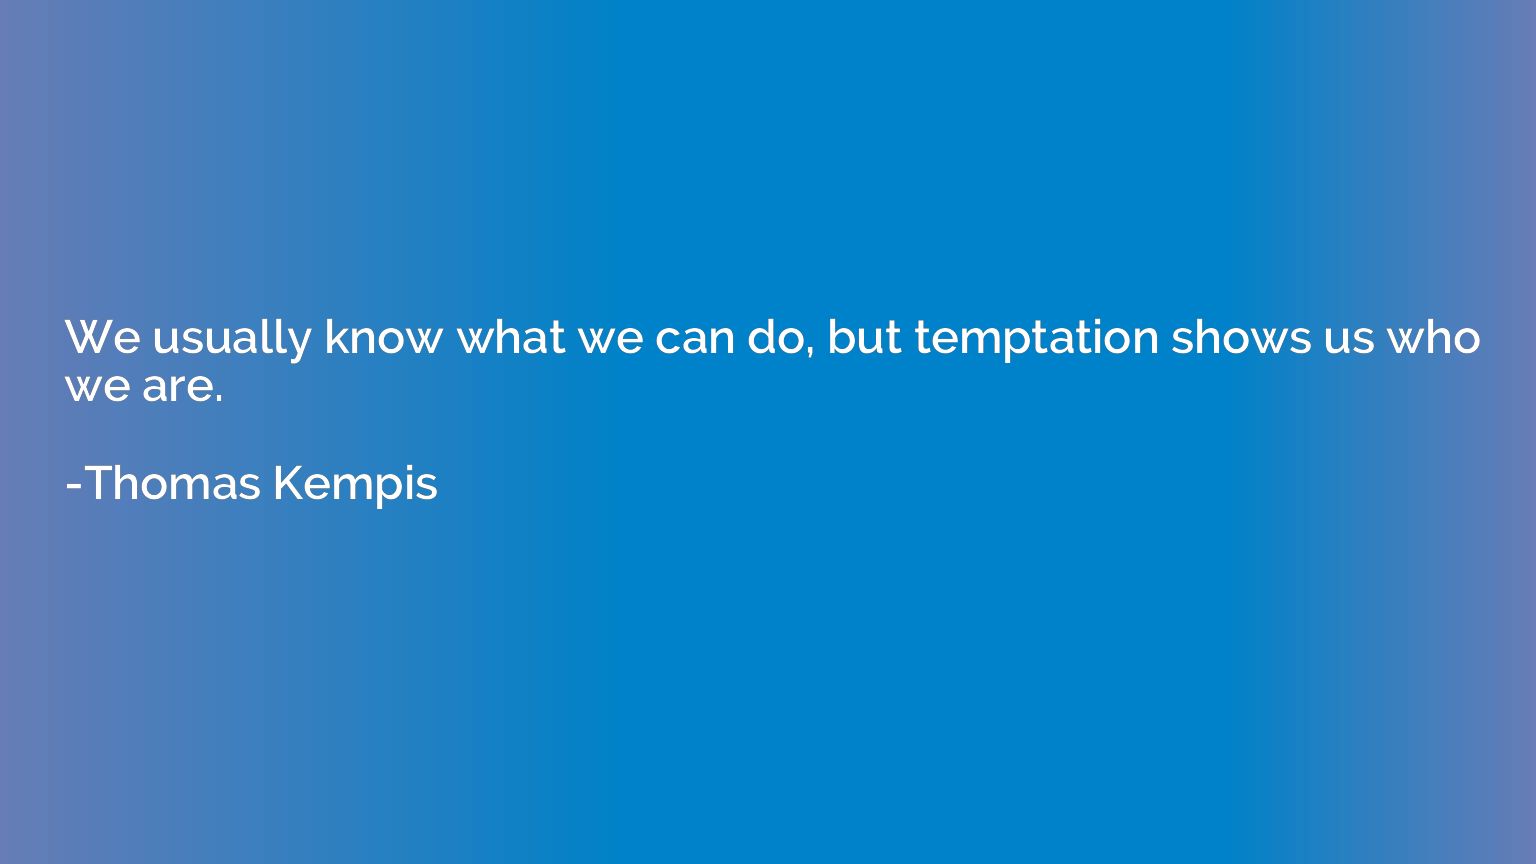 We usually know what we can do, but temptation shows us who 